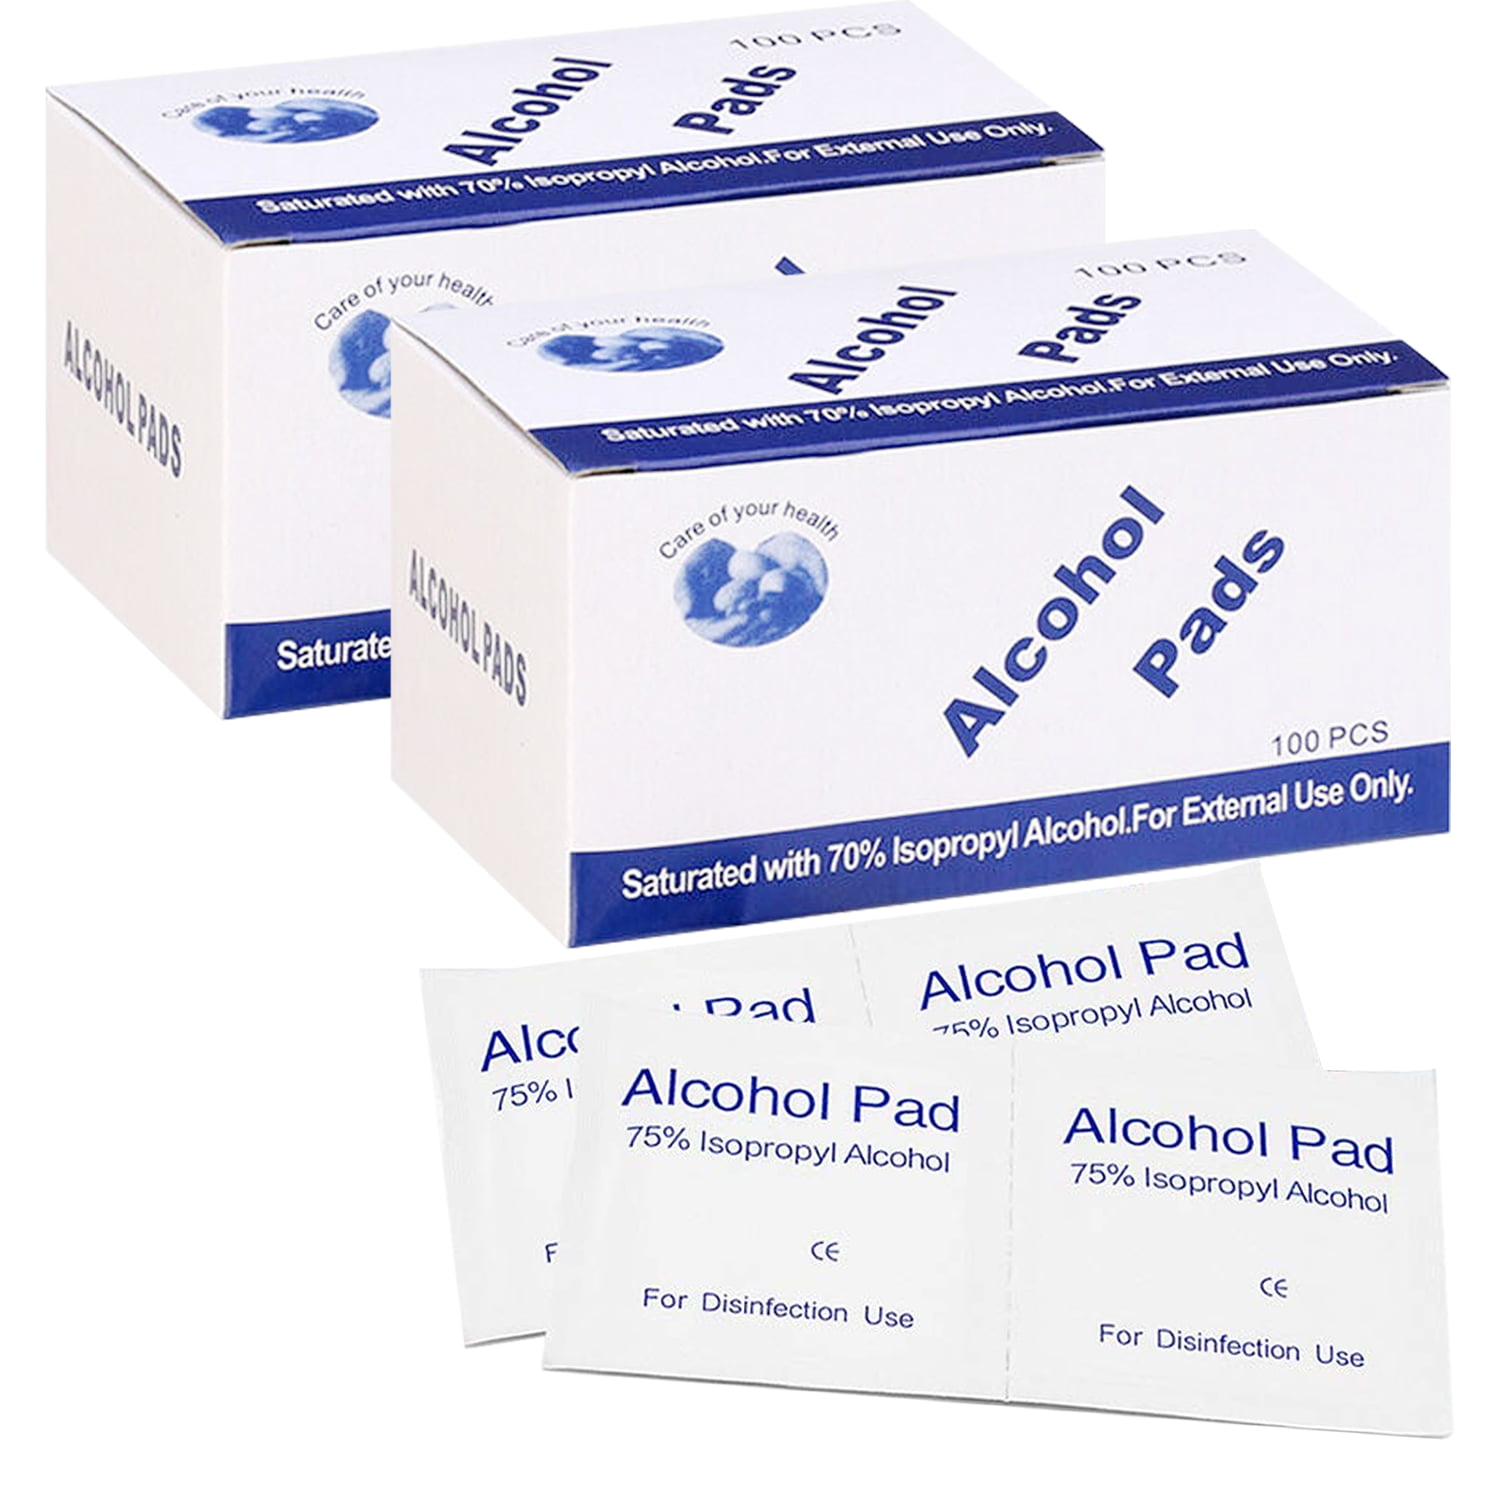 1 box Alcohol Wet Wipe Disposable Disinfection Prep Swap Pad Antiseptic Skin Cleaning Care Jewelry Mobile Phone Clean Wipe Alcohol Prep Pad Sterile 100pcs/pack Alcohol Pads